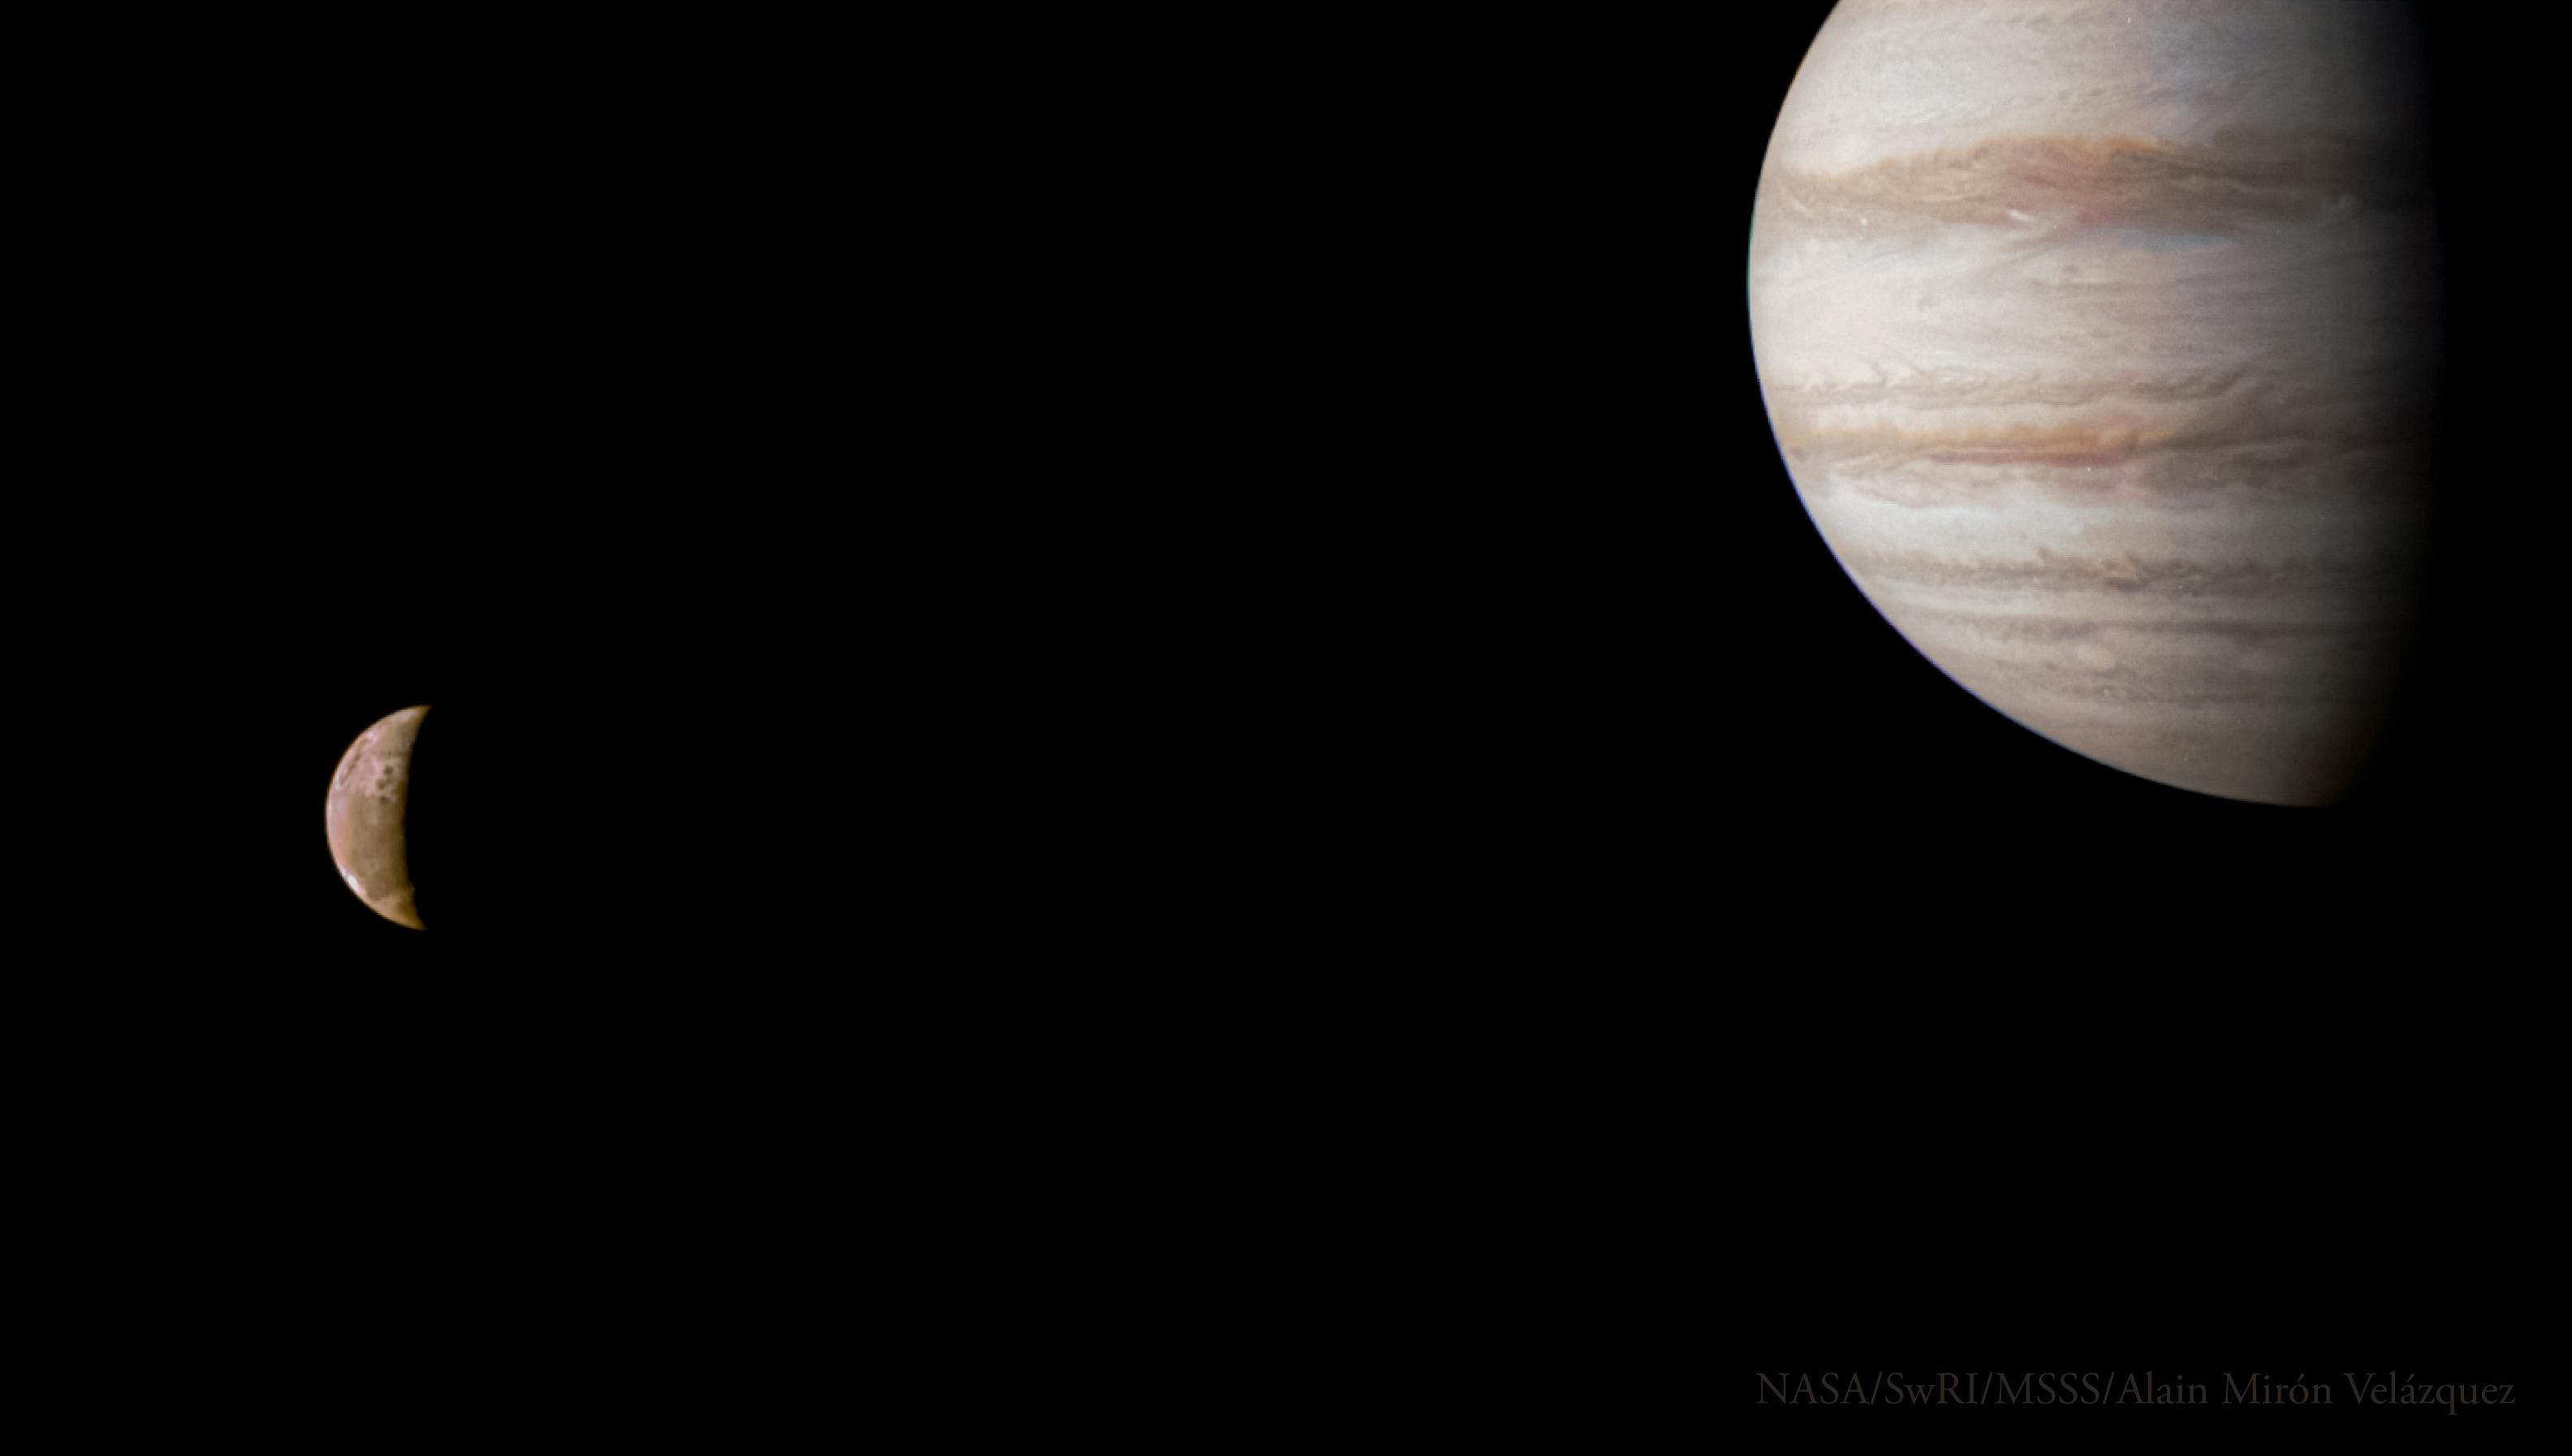 Jupiter is in the upper right corner with moon Io to the bottom left.